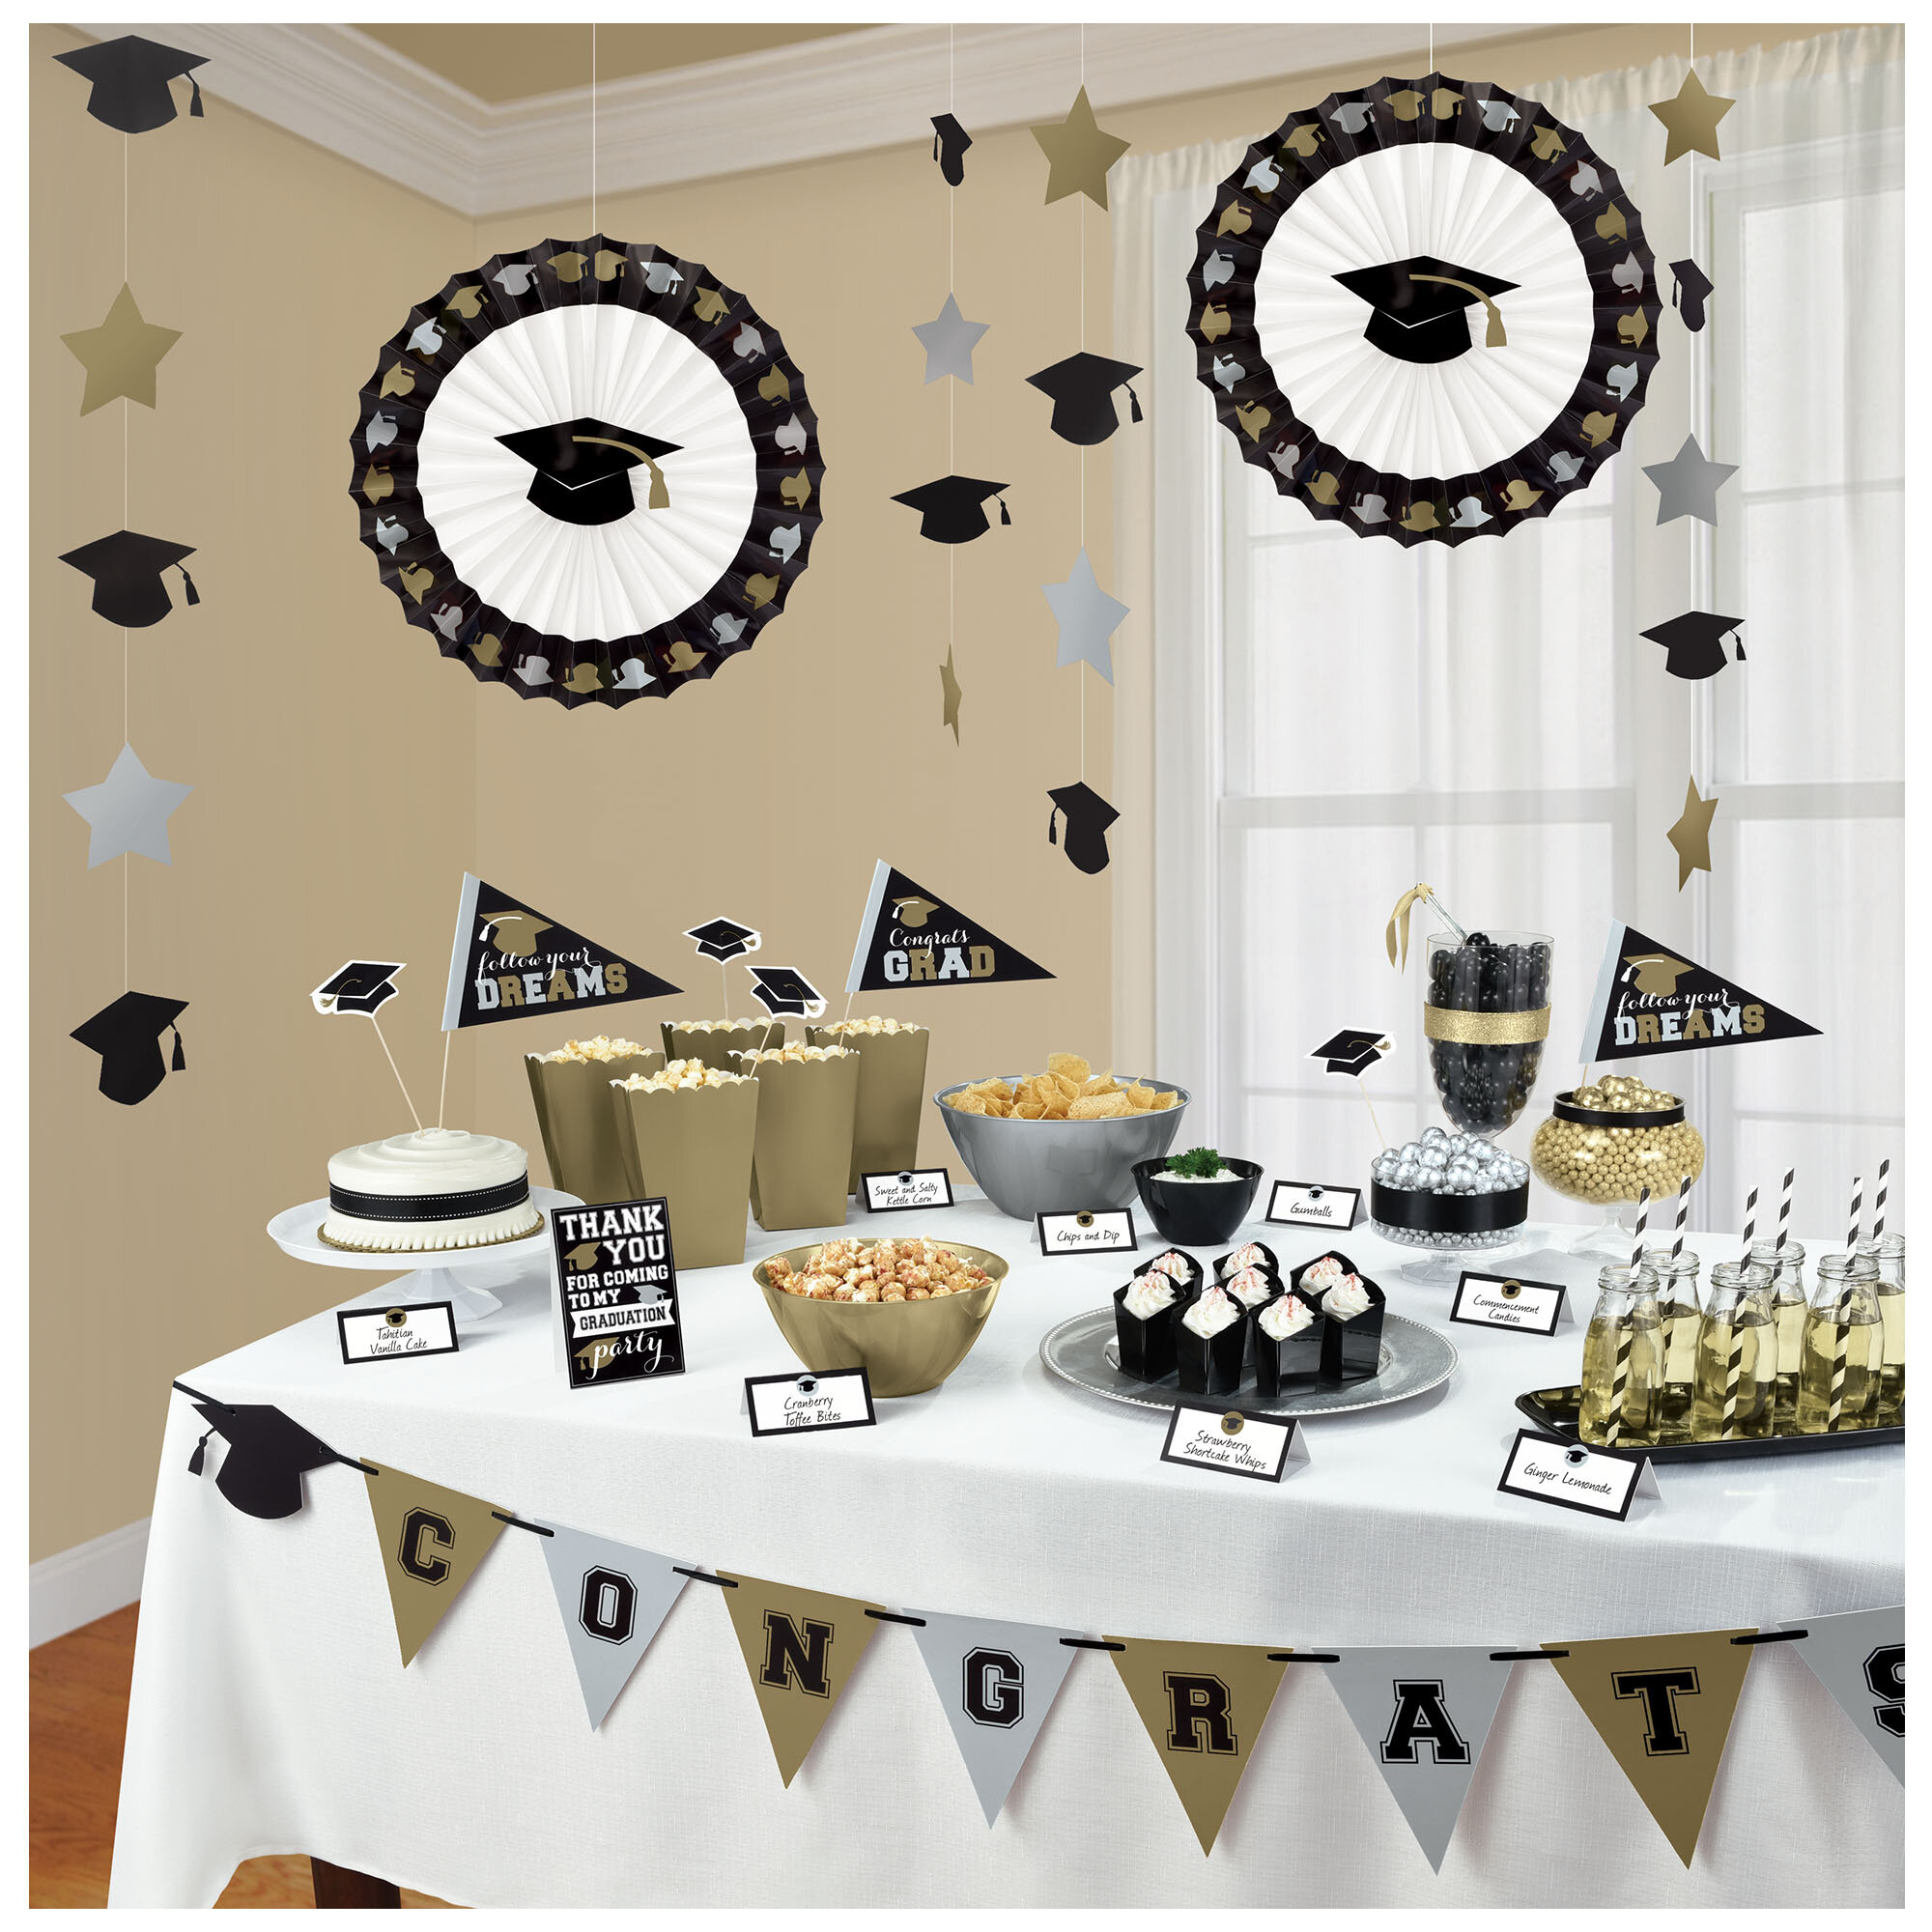 Grad Party Decoration Supplies Class 2020 Graduation Party Tinsel Balloon Centerpieces Weights Pack of 4 Colors: Black, White, Golden, Silver